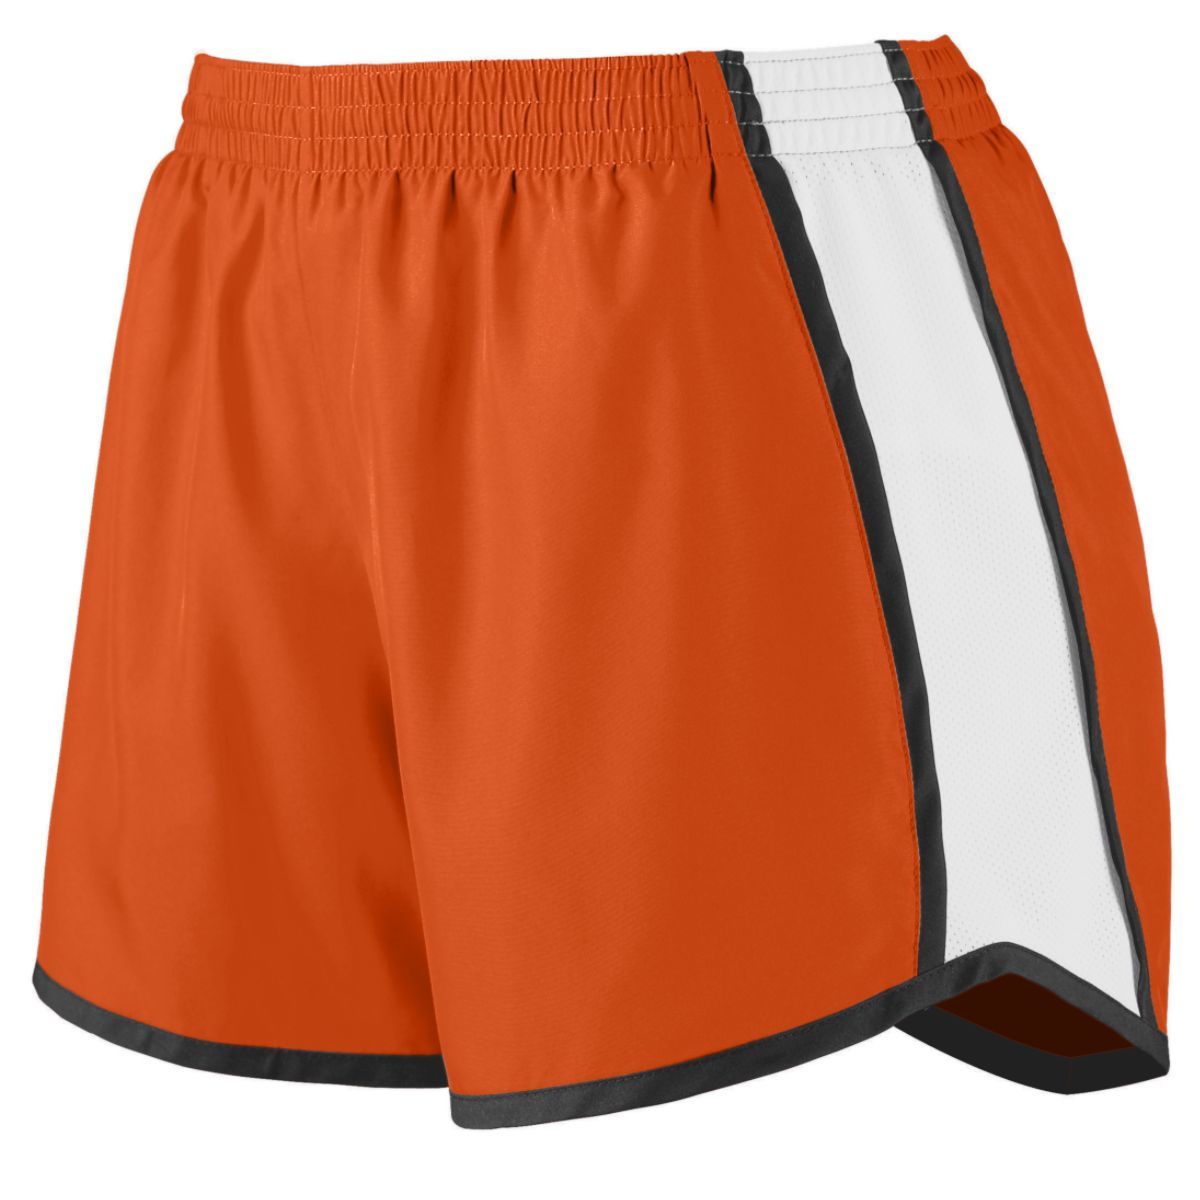 Augusta Sportswear Girls Pulse Team Shorts in Orange/White/Black  -Part of the Girls, Augusta-Products, Volleyball, Girls-Shorts product lines at KanaleyCreations.com